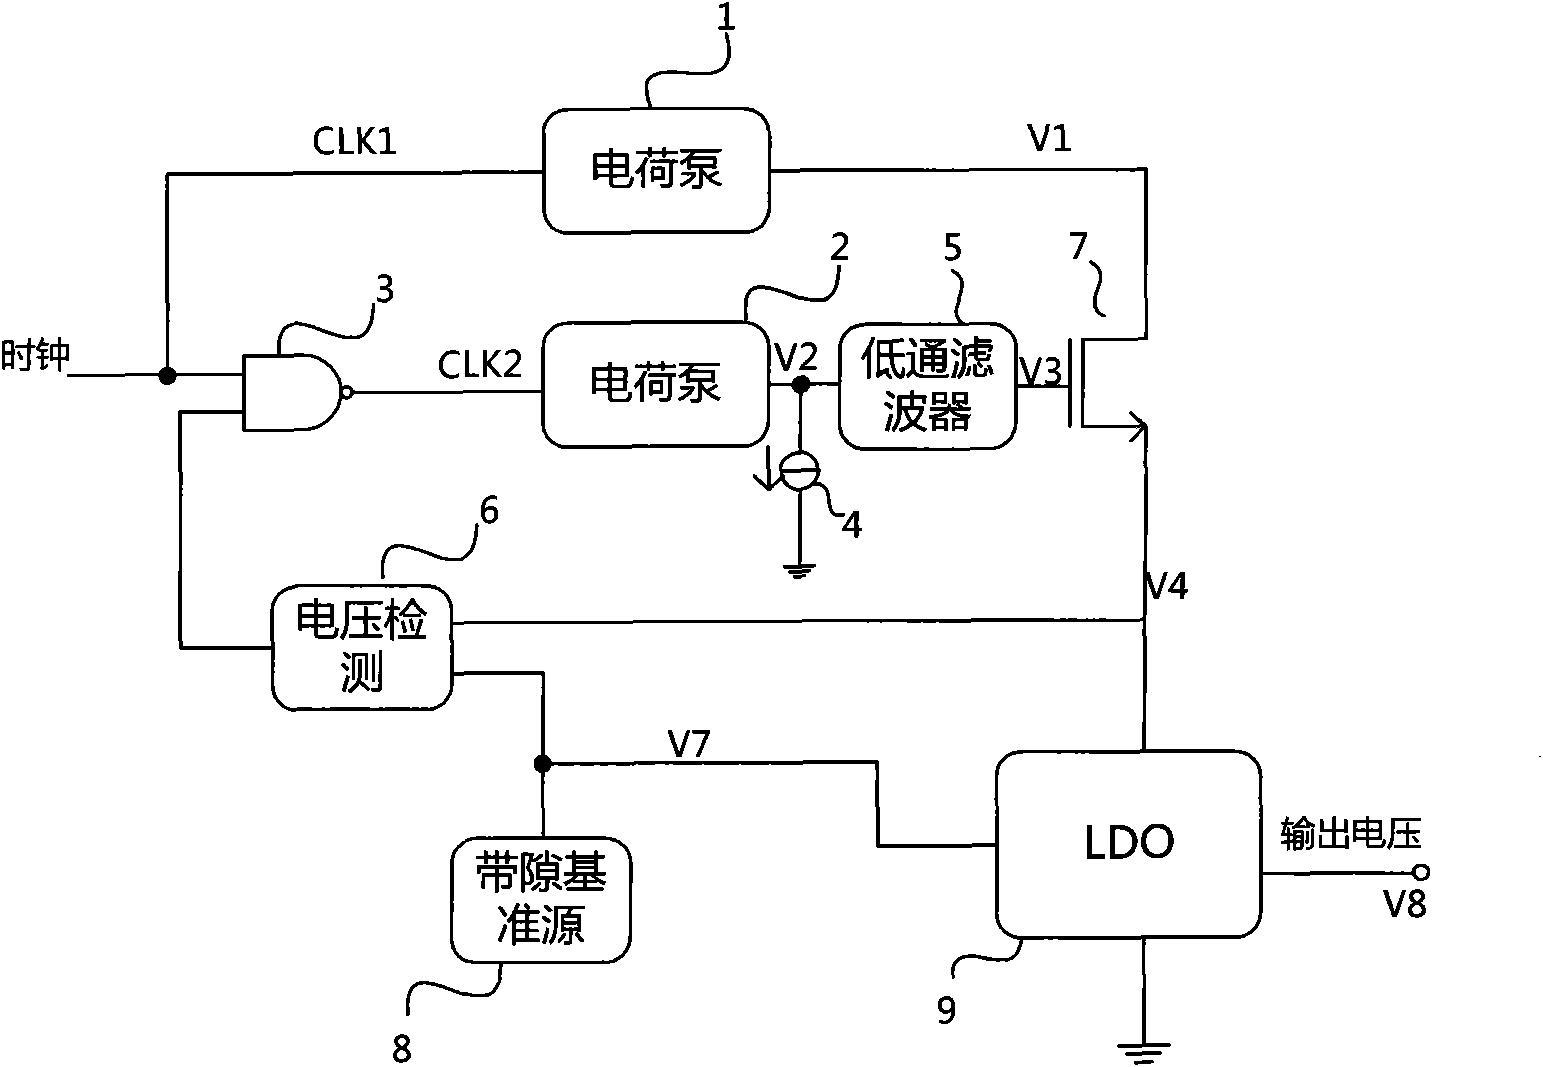 Voltage stabilizer on mixed signal integrated circuit chip